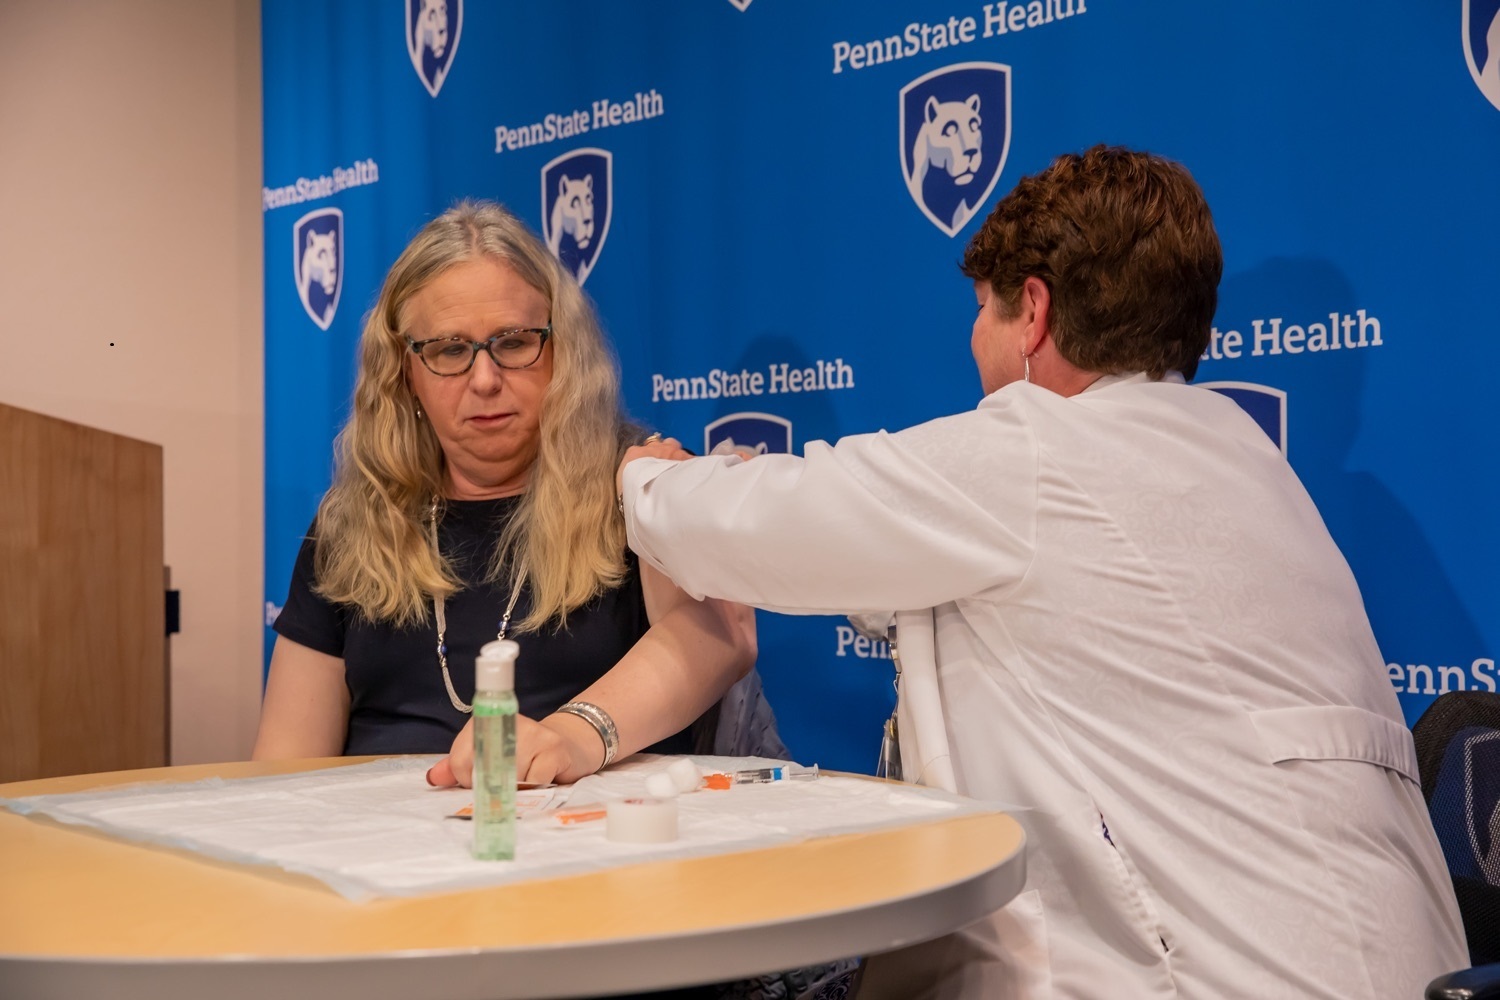 Dr. Rachel Levine, left, sits at a table with Lori Bechtel, nurse manager for Employee Health and Employee Safety as Bechtel gives her a flu shot. Levine has long, wavy hair and is wearing glasses and a dress. Bechtel has short hair and is wearing a white lab coat. Hand sanitizer and a syringe are on the table. Behind them is a banner with the Penn State Health logo on it and a podium.